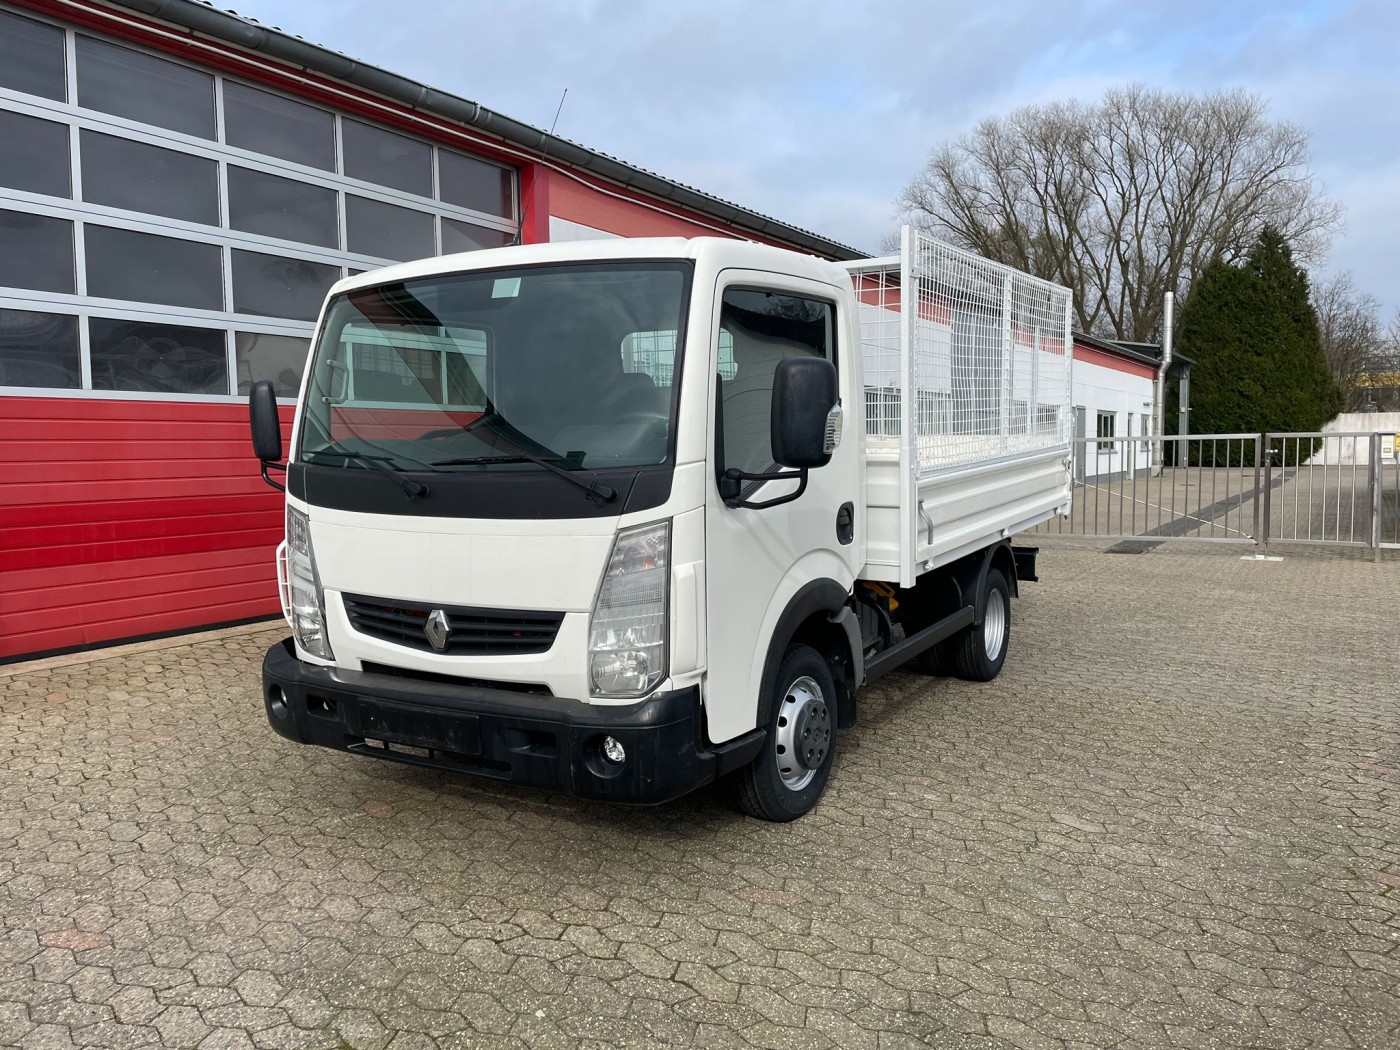  -  Maxity 140.35 tipper 3 seats 1415 kg payload!